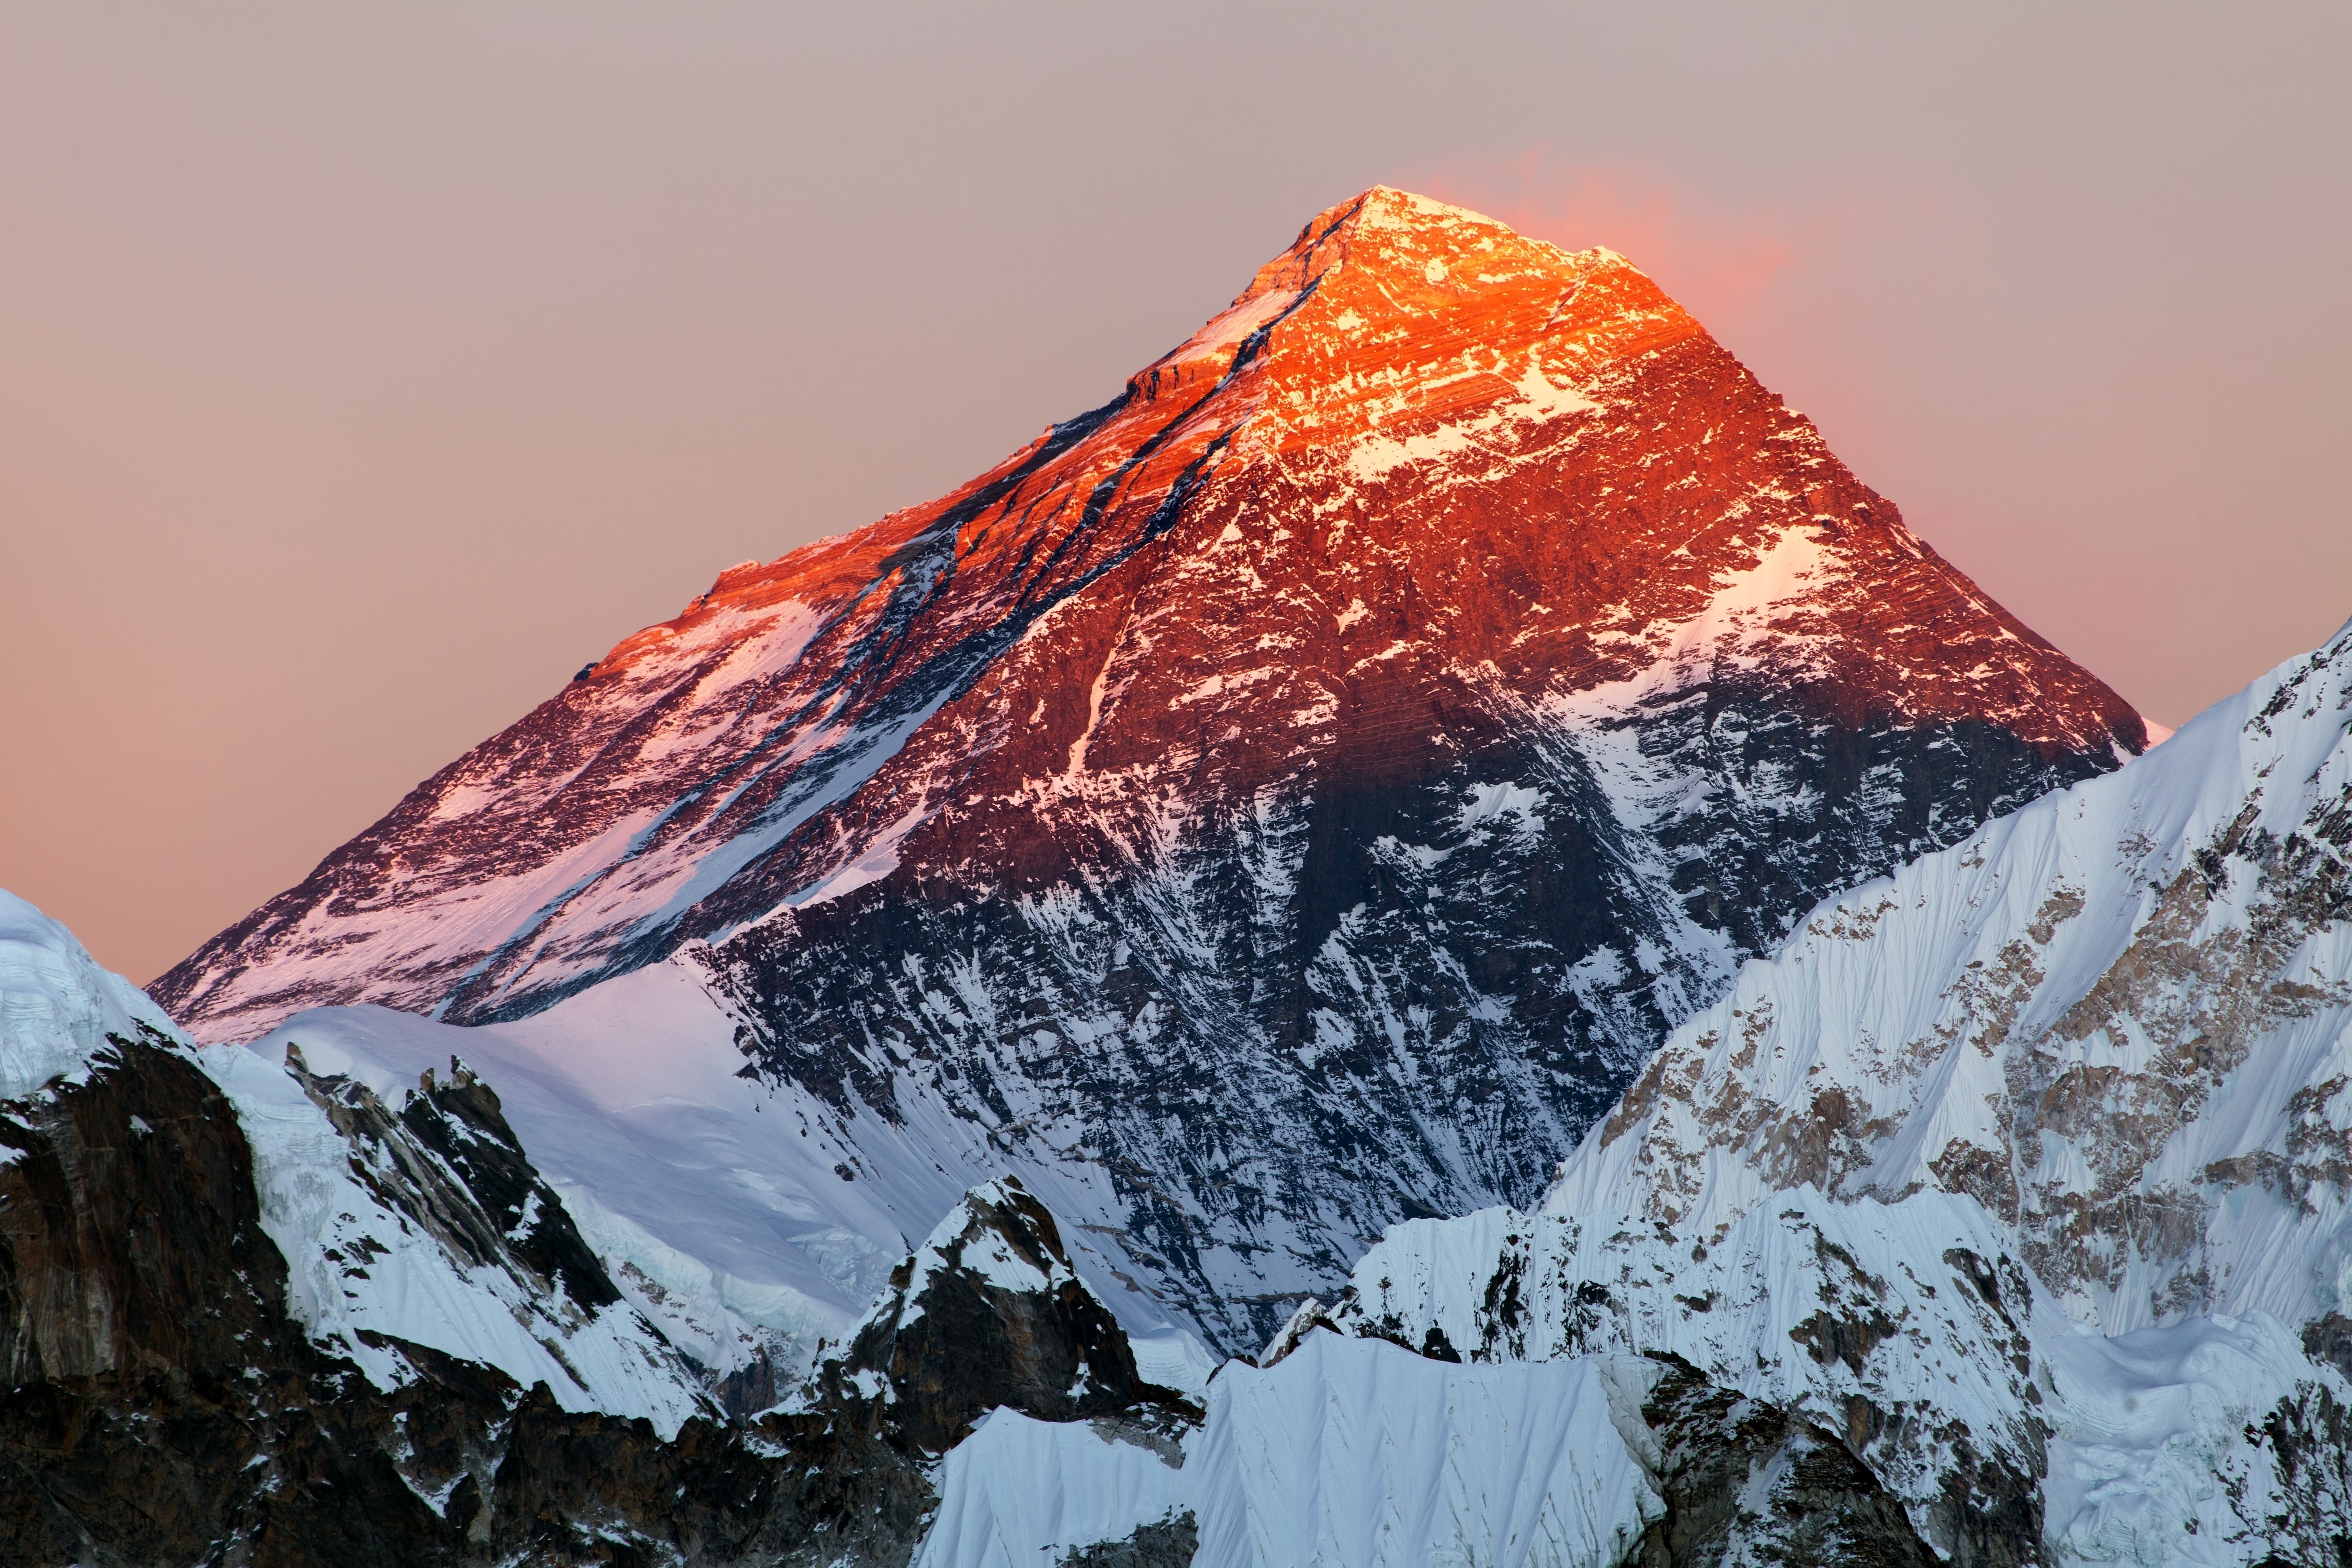 5 Business Lessons Learned from Everest